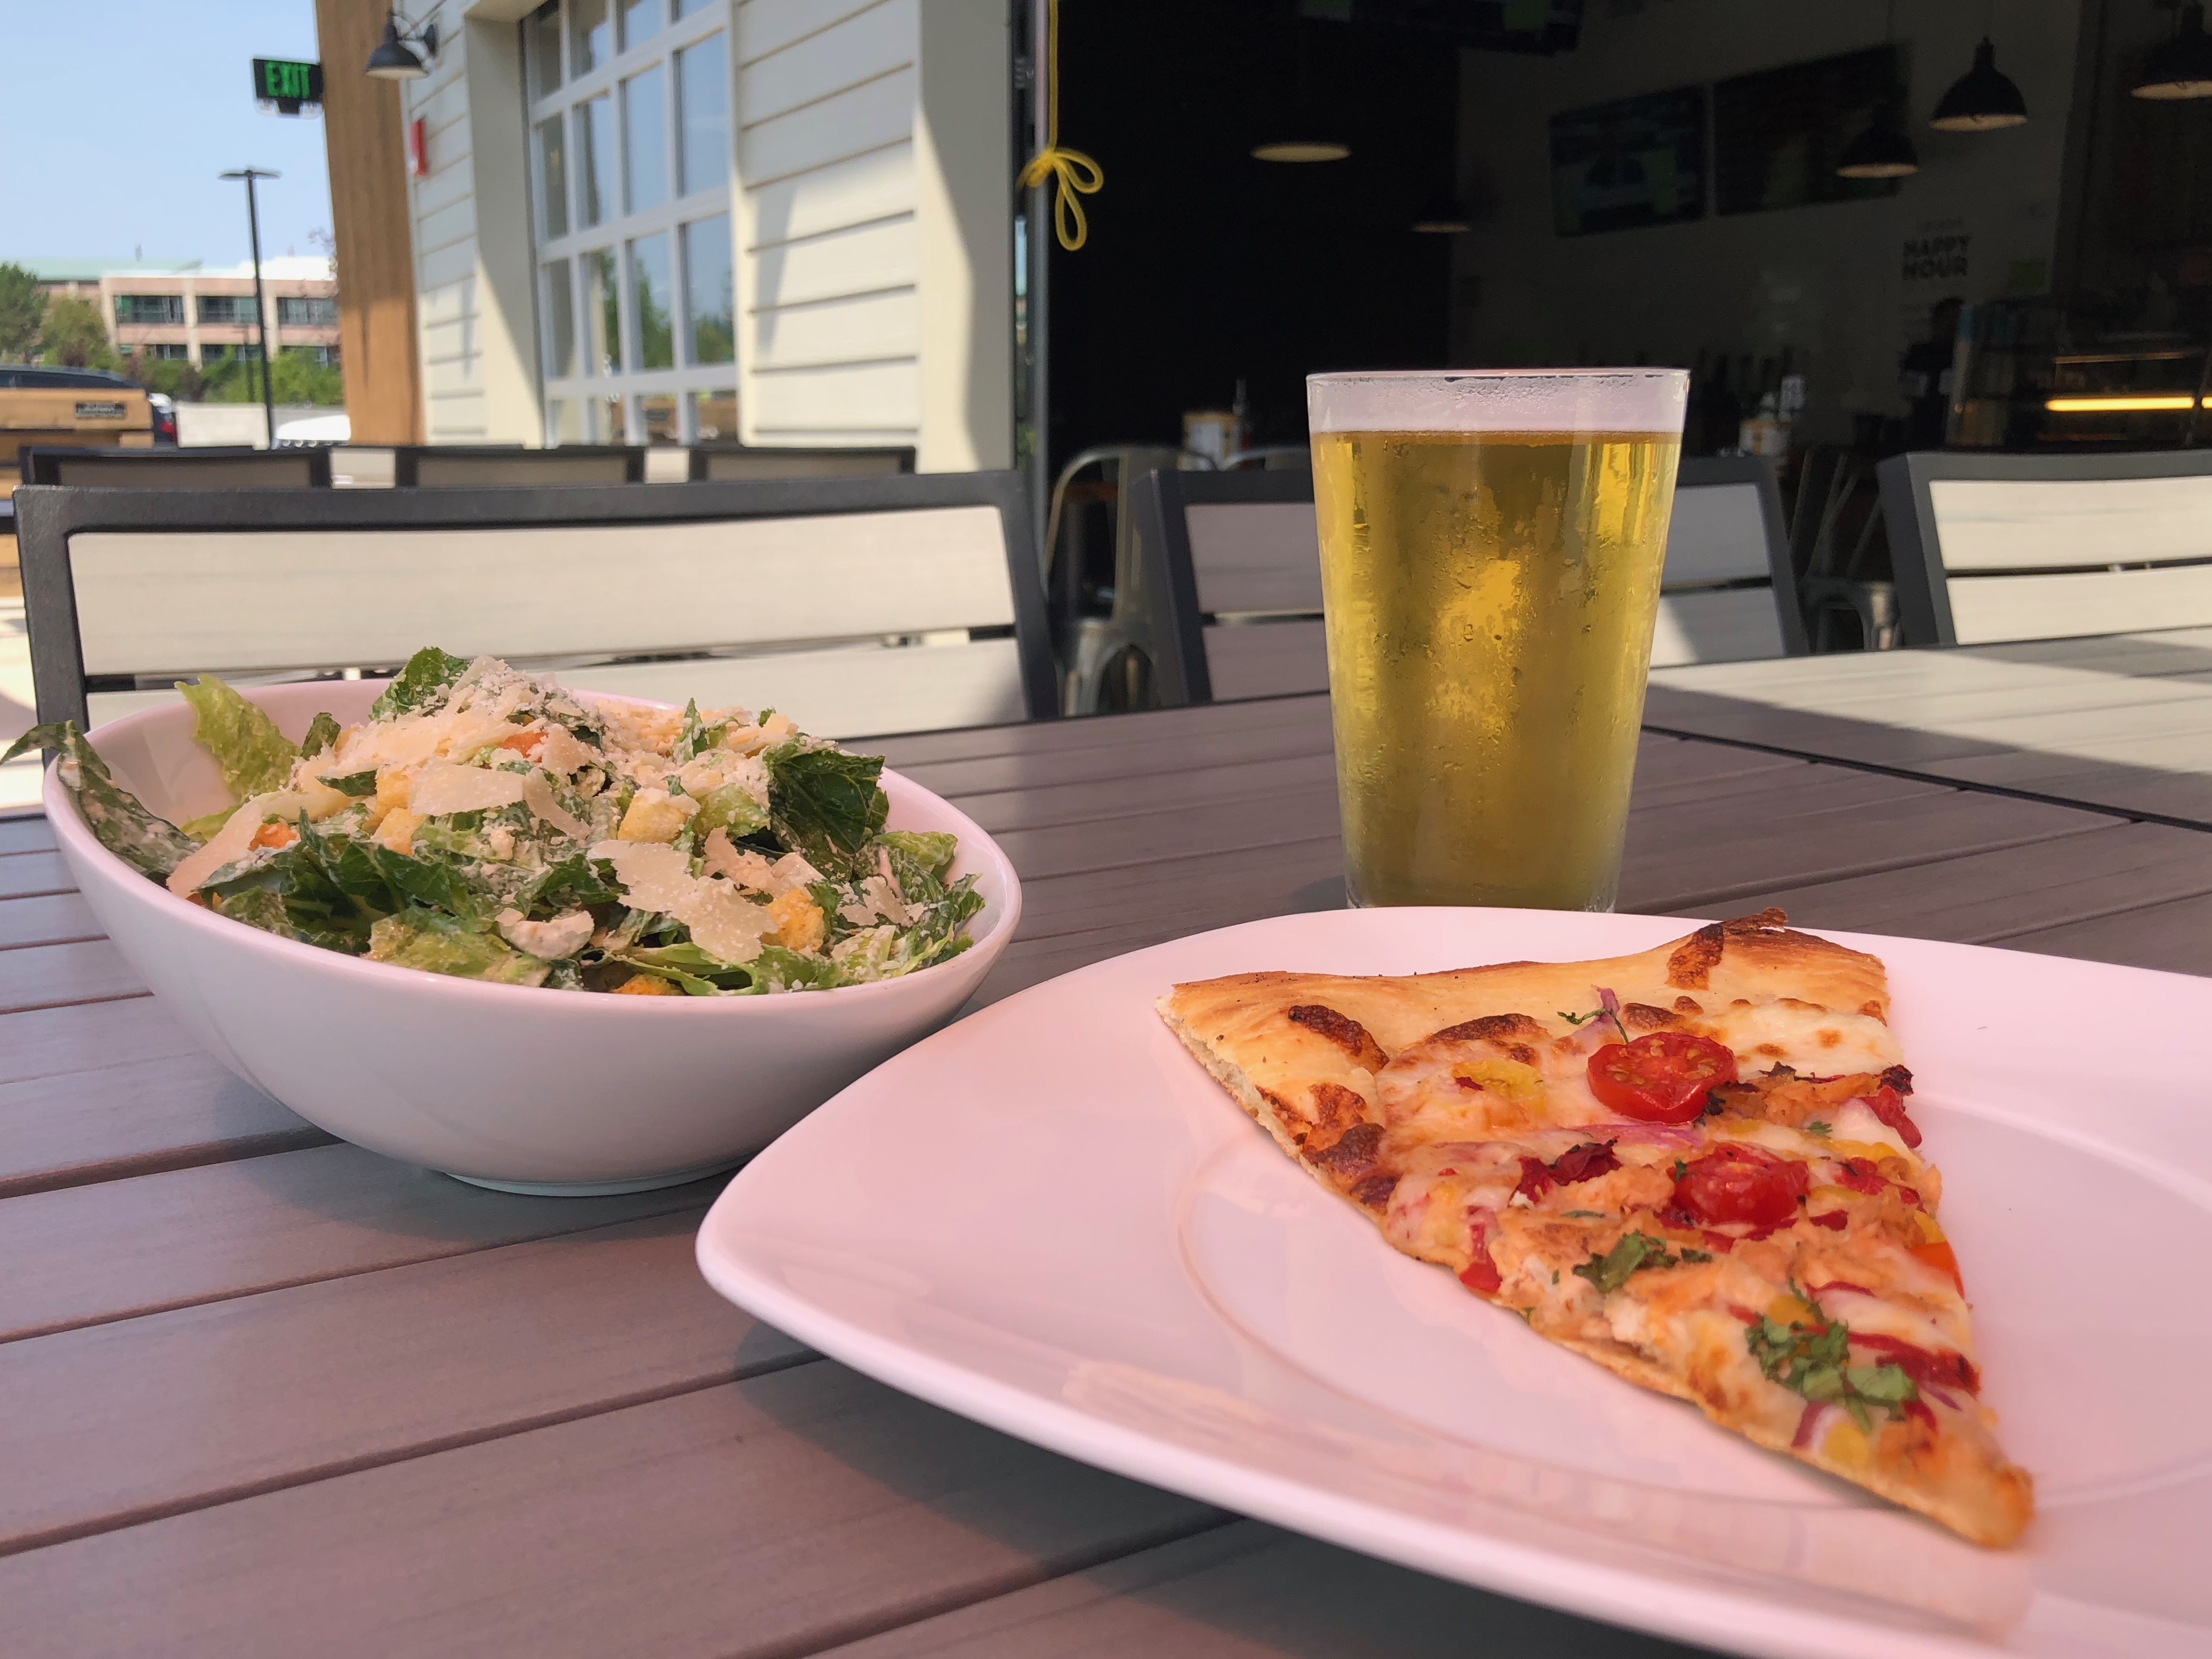 A great $9.95 deal of a slice of pizza, salad and beer at ZPizza Tap Room.